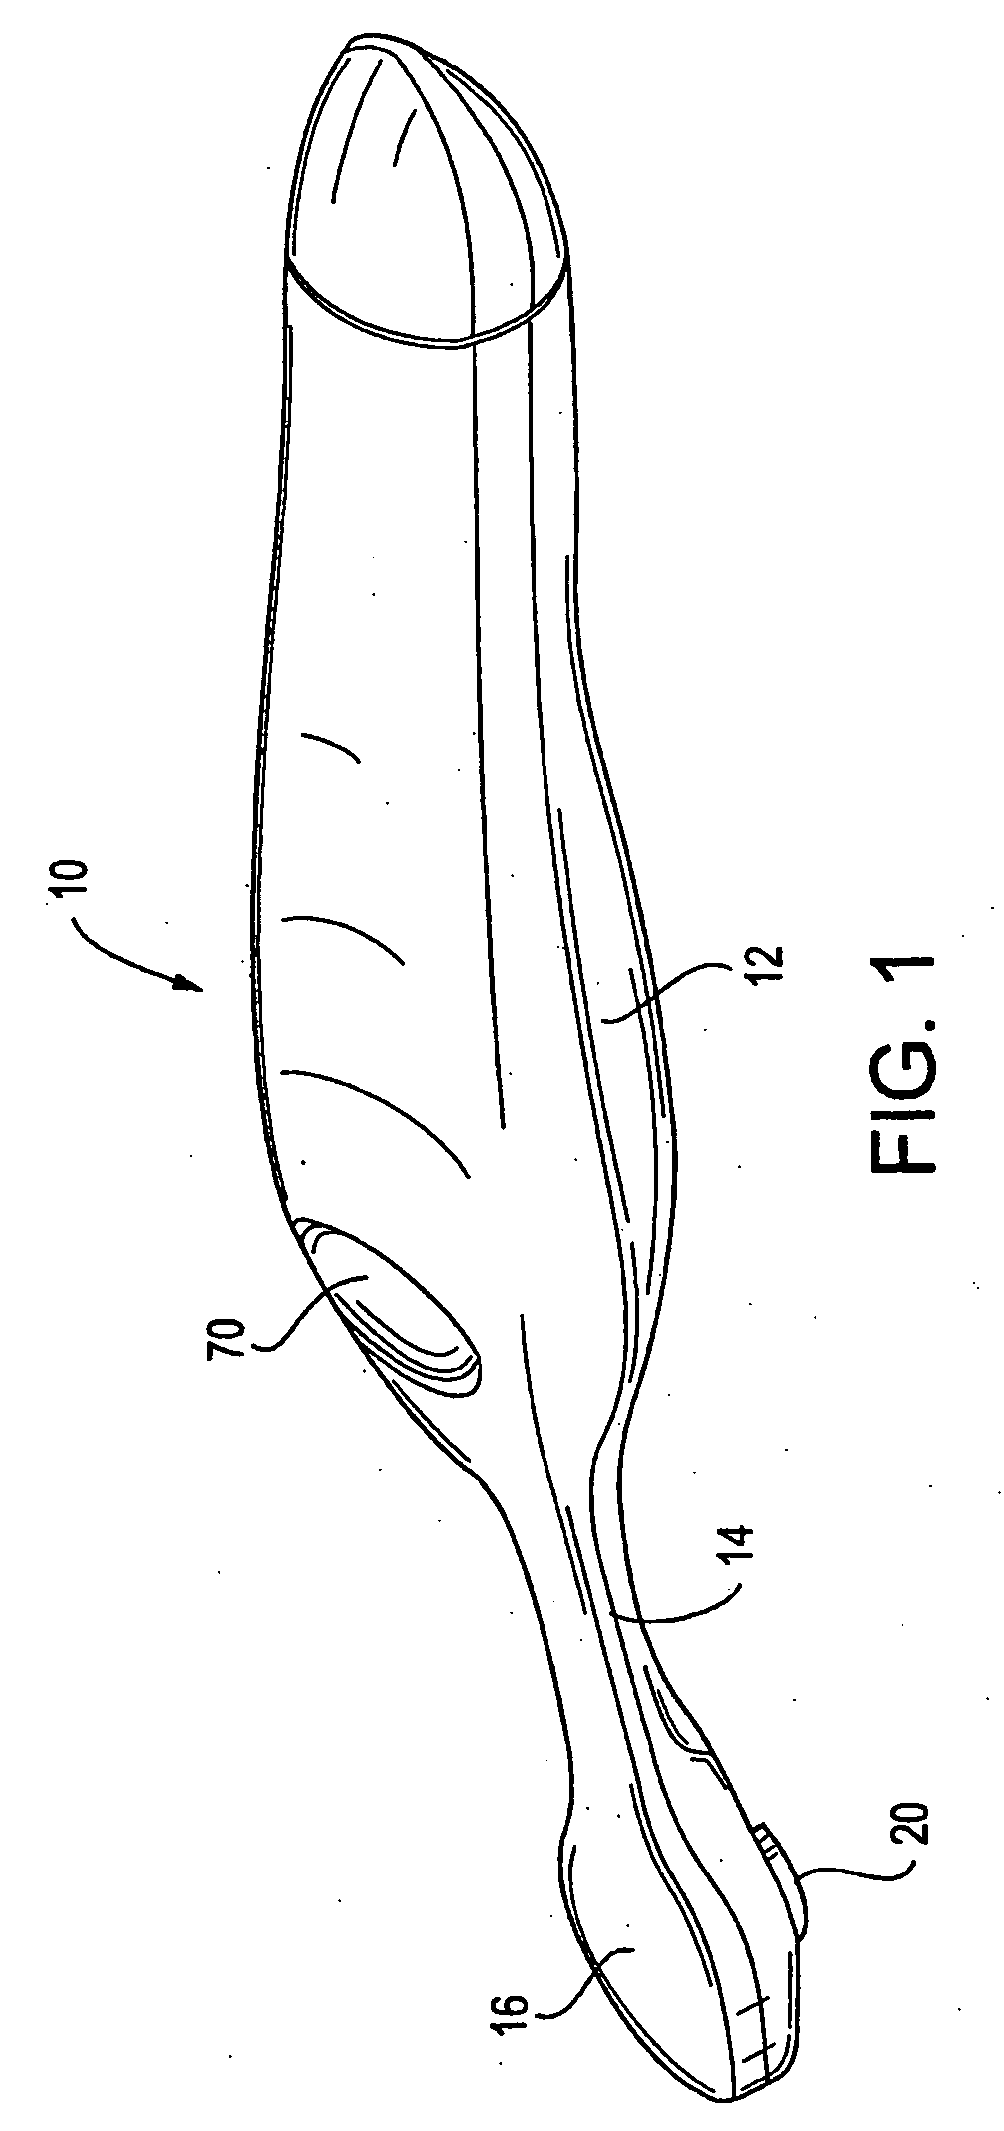 Electric toothbrush comprising an electrically powered element